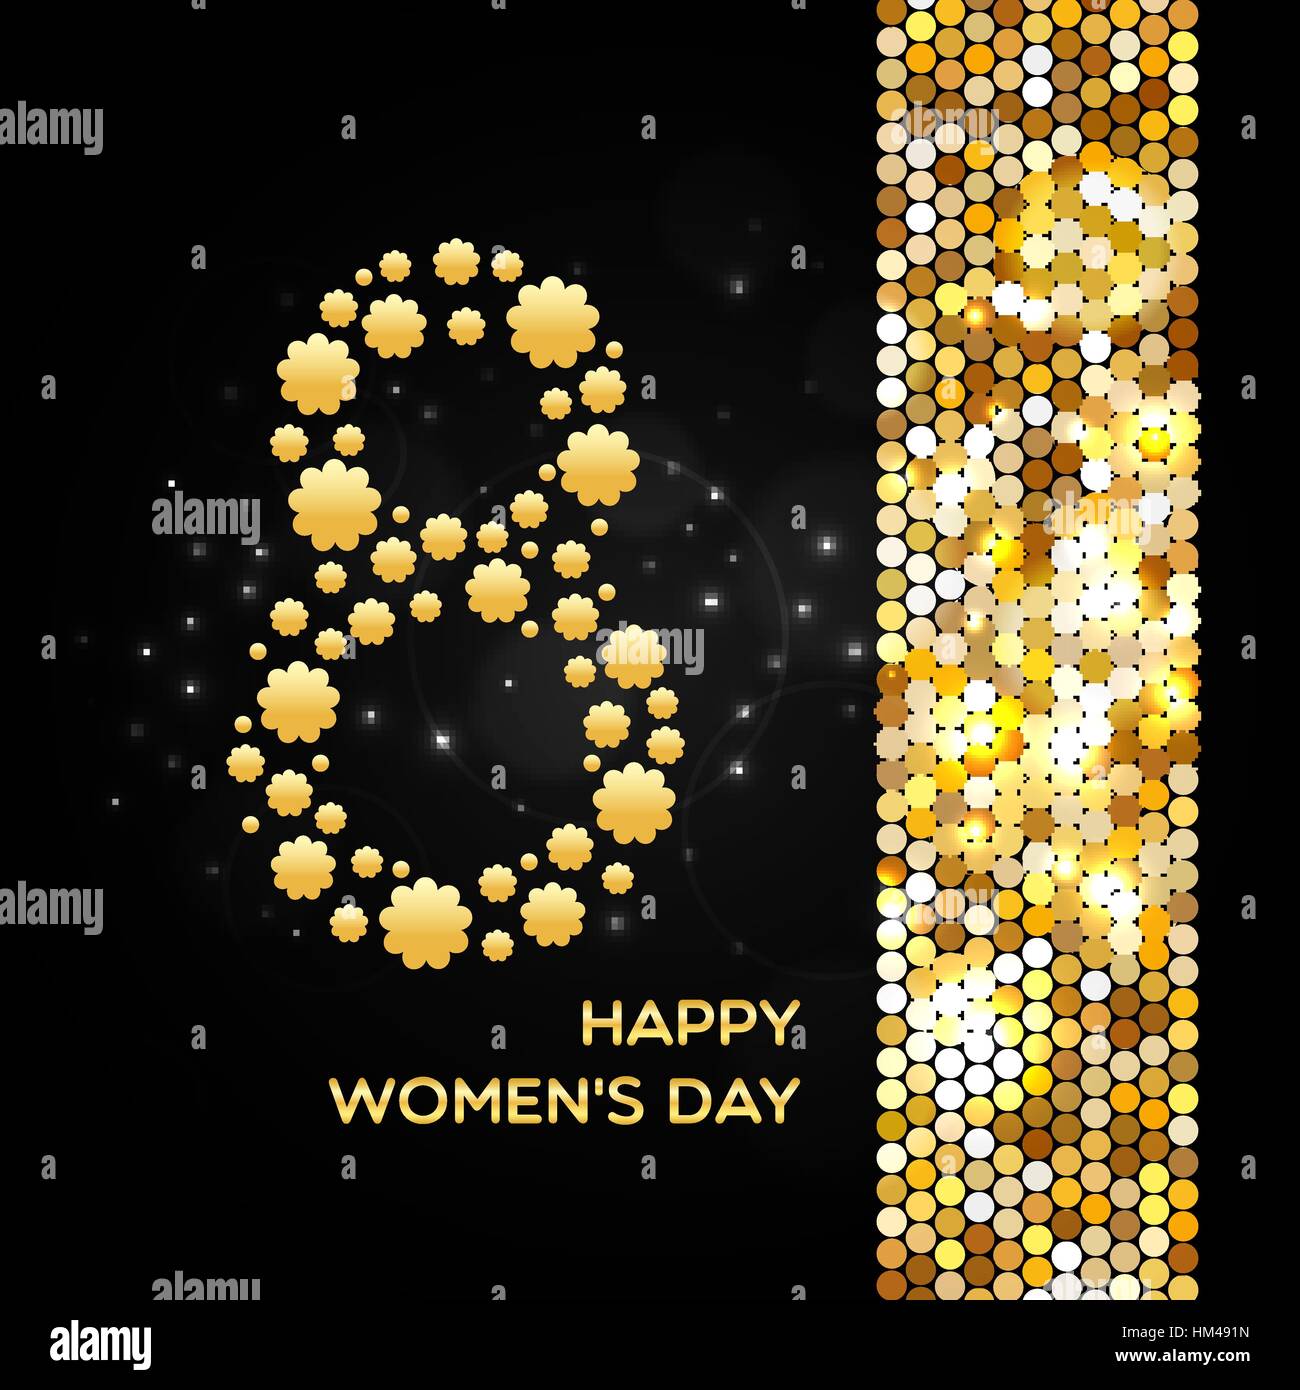 March 8. Happy Women's Day golden shimmer background made of abstract spangles for your greeting card design Stock Vector